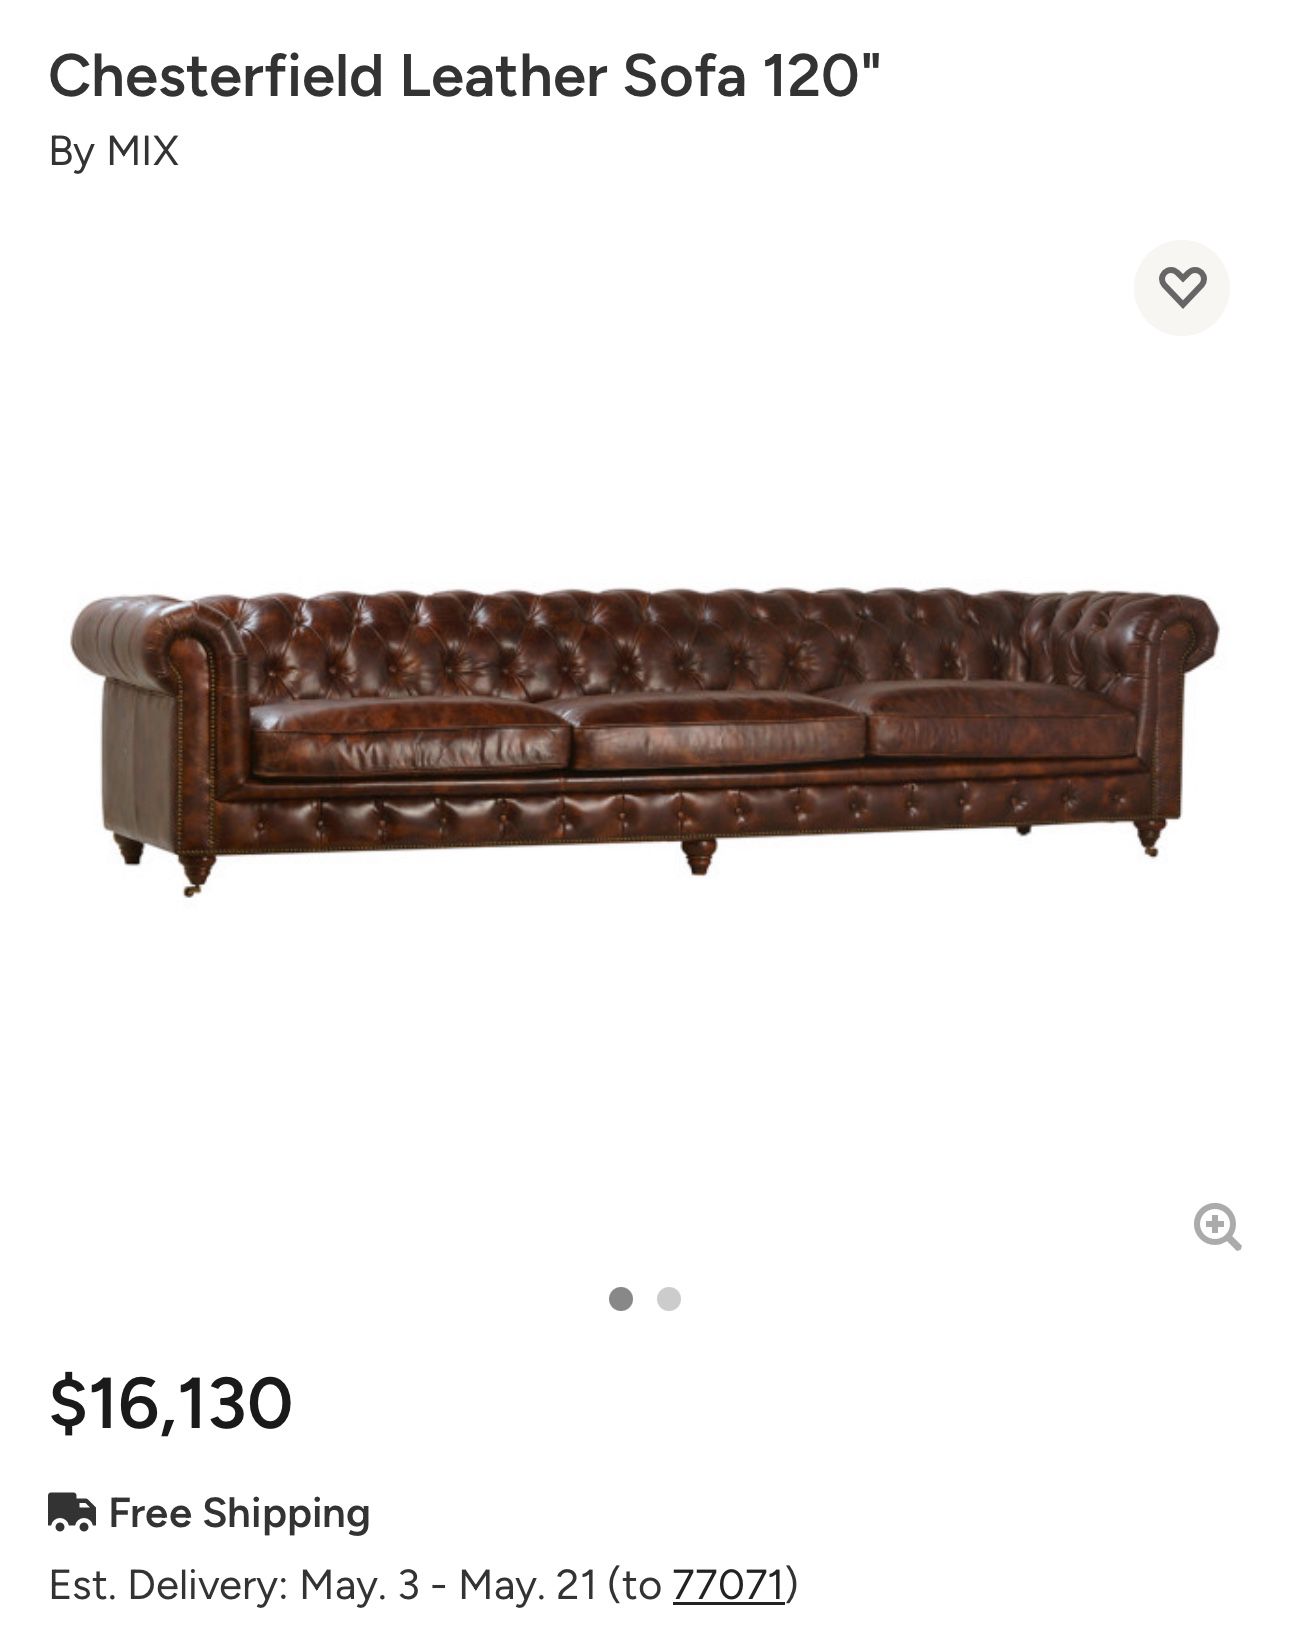 Excellent Condition Leather Tufted Couch For Sale 